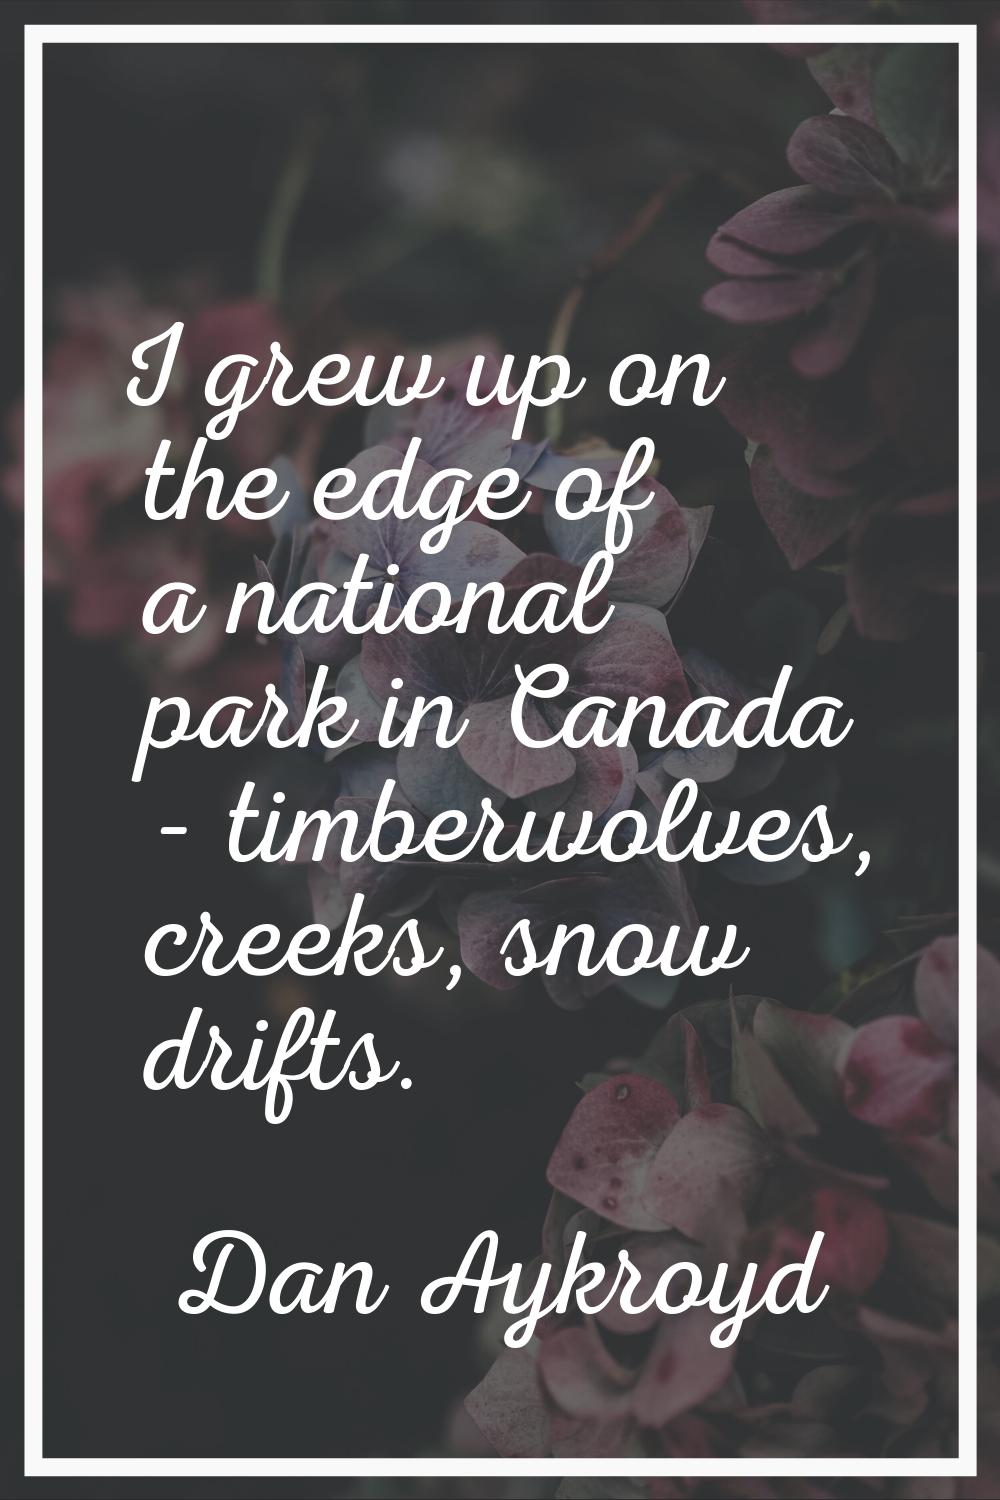 I grew up on the edge of a national park in Canada - timberwolves, creeks, snow drifts.